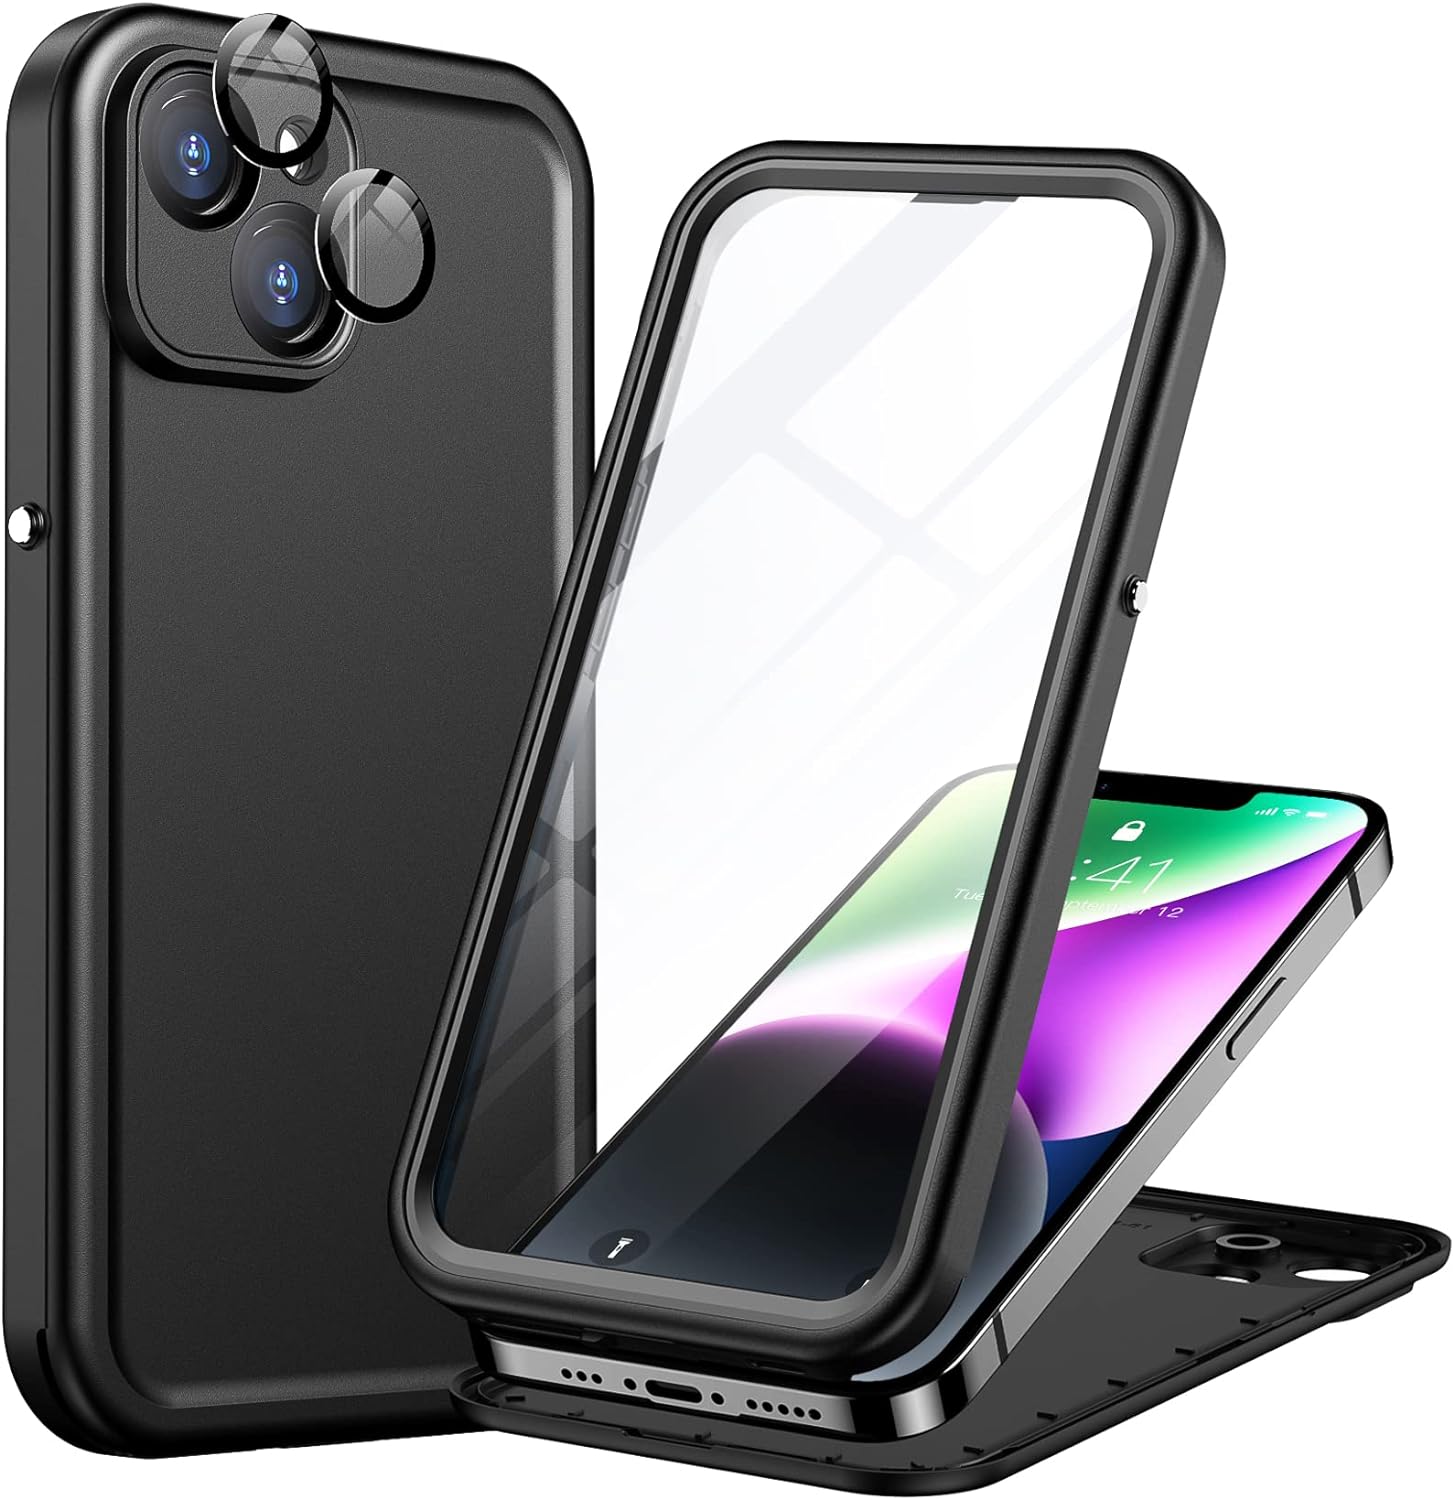 Case Waterproof with [Shoulder Strap & Stand] Built-in Screen Protector Shockproof Slim Thin Cover- Black/Clear